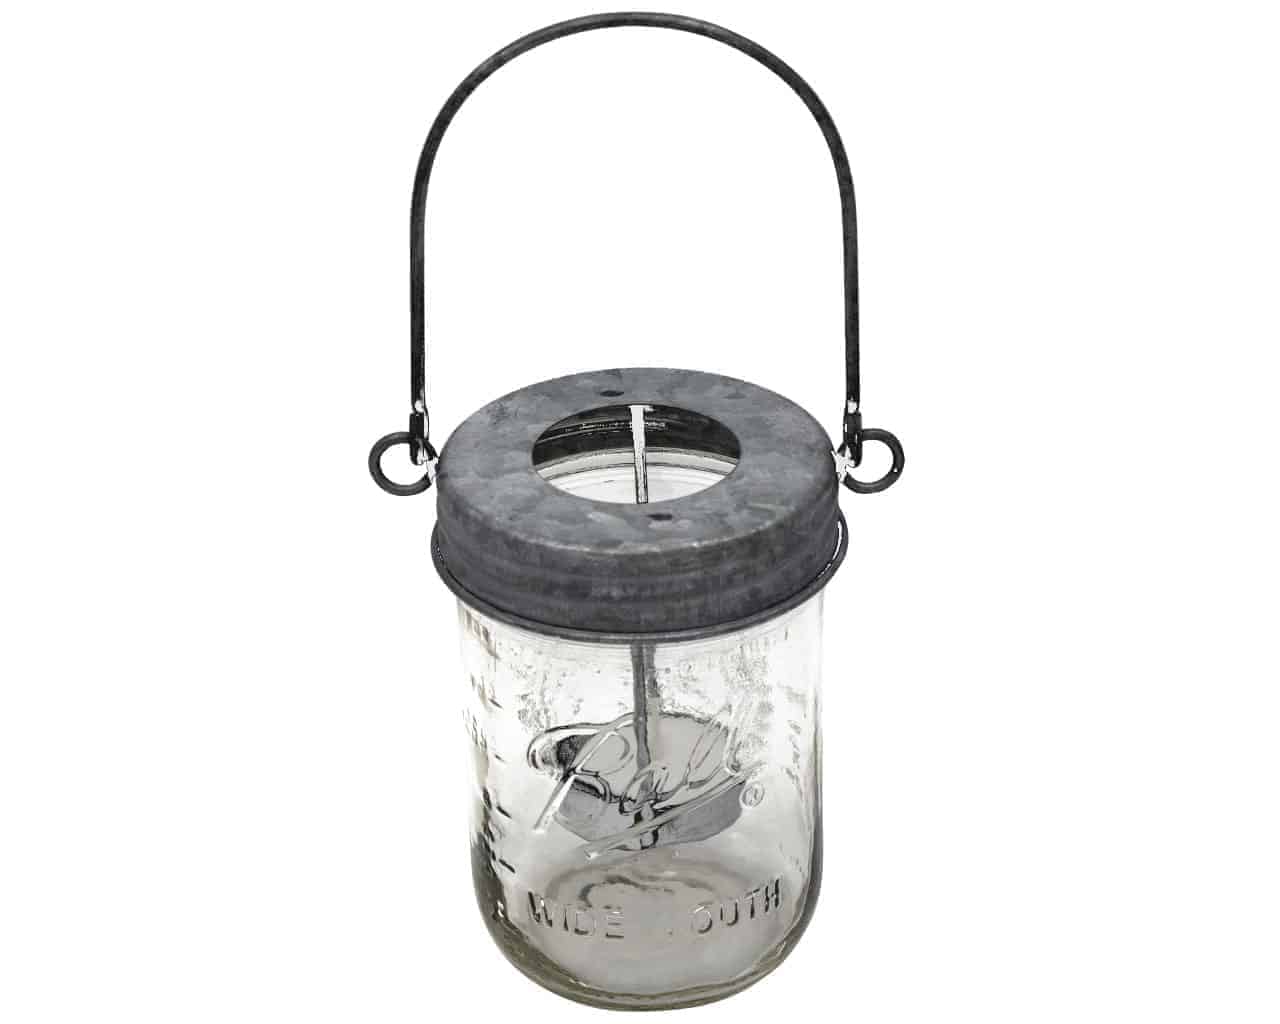 Galvanized Metal Tea Light Candle Holder Lids With Handles for Mason Jars 3 Pack